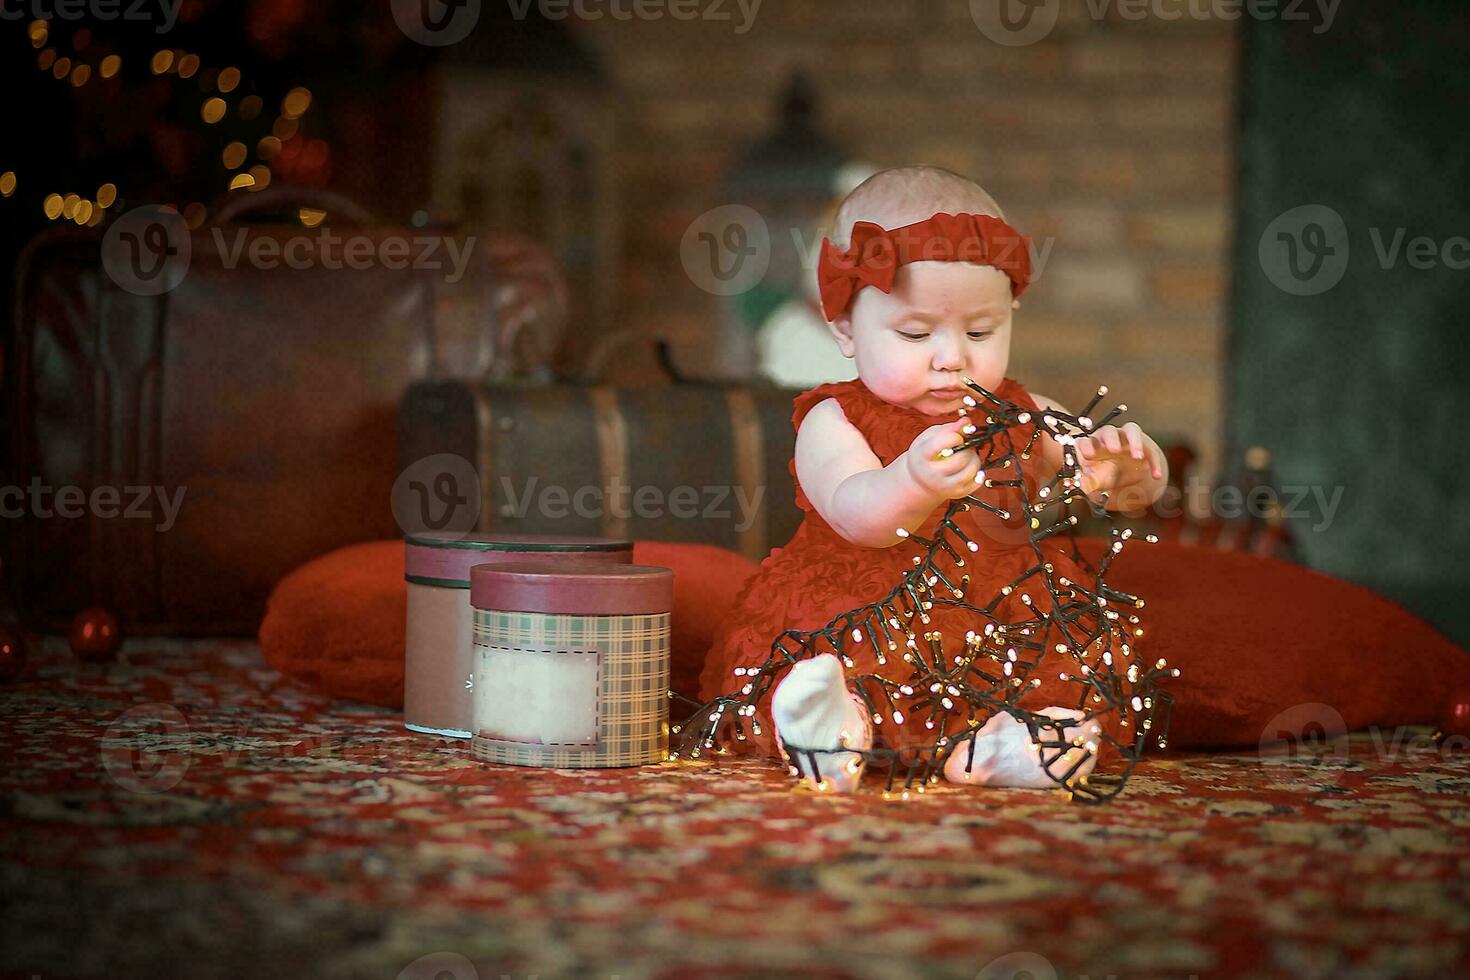 little girl in red dress against background of Christmas tree holds Christmas garland in her hands. baby 6 month old celebrates Christmas. photo